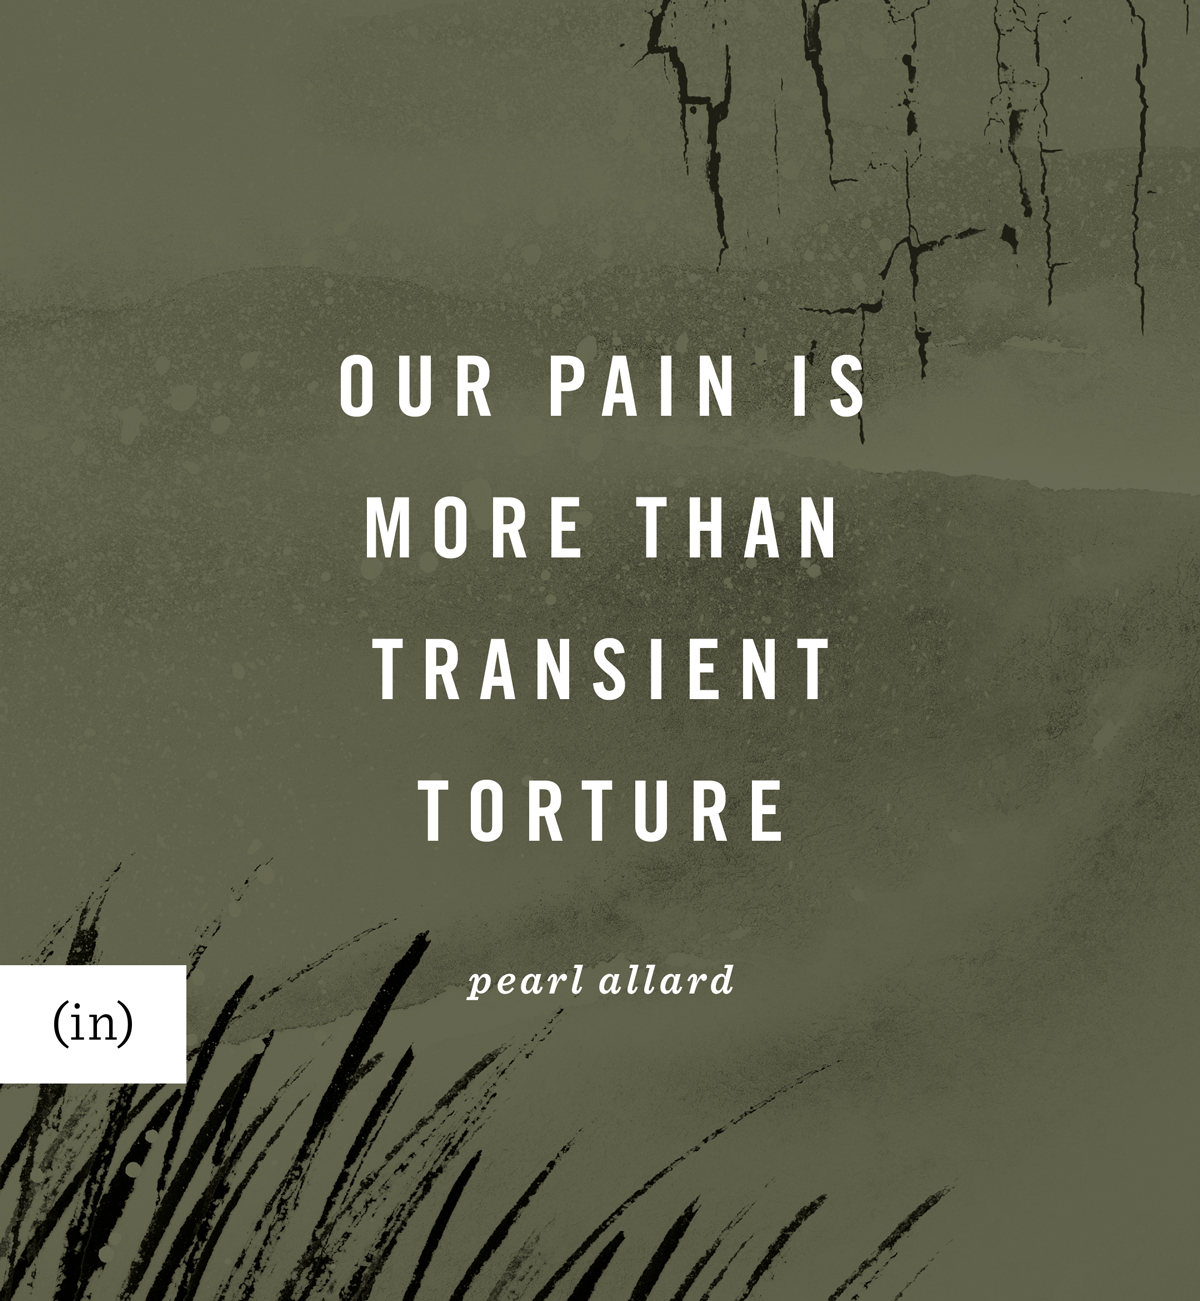 Our pain is more than transient torture. -Pearl Allard